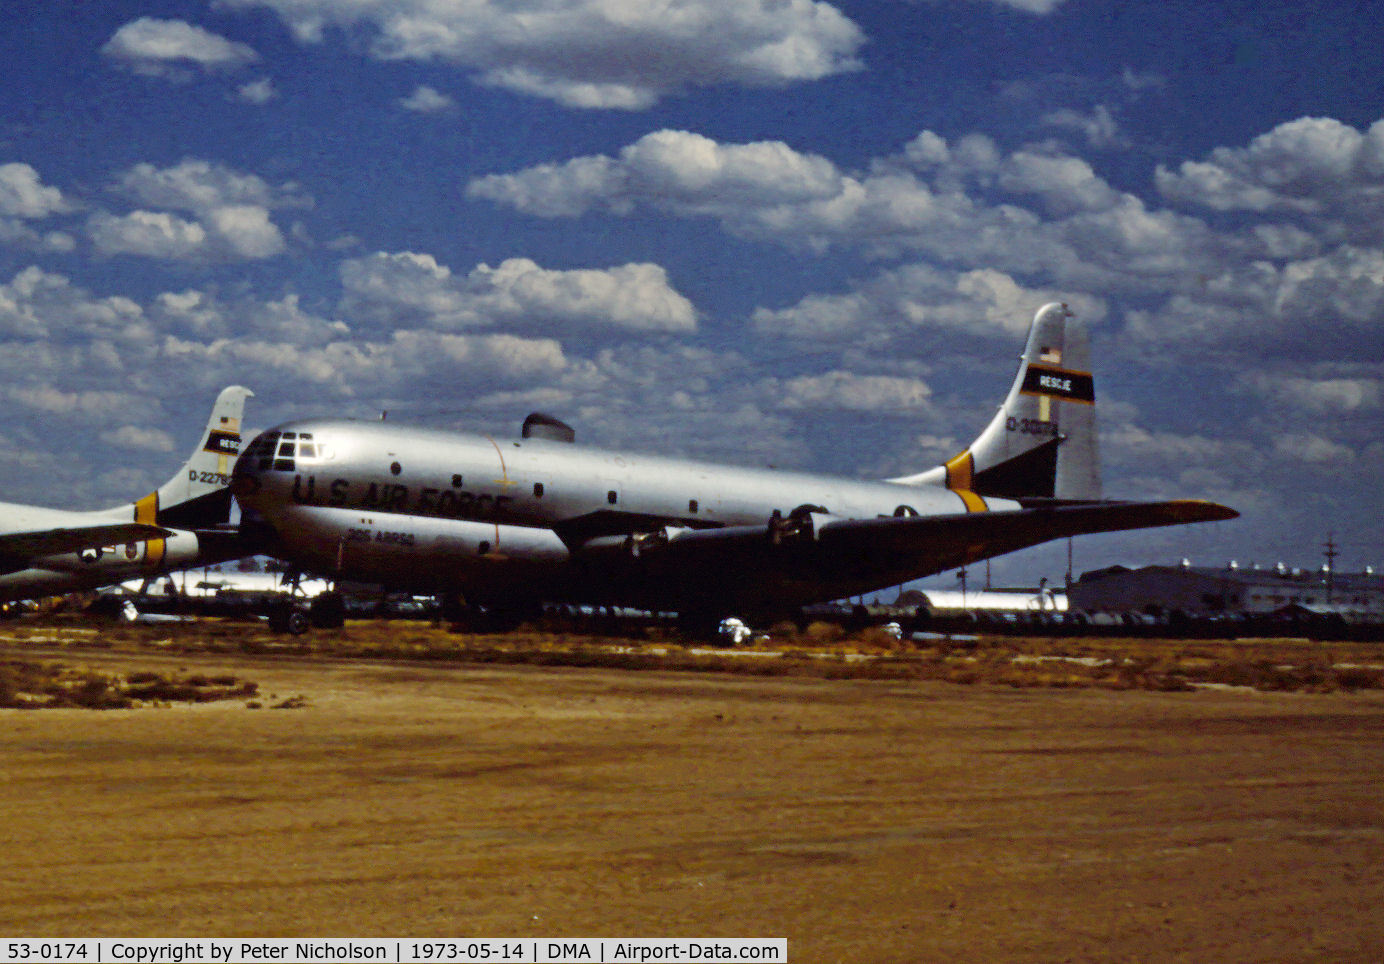 53-0174, 1953 Boeing HC-97G Stratofreighter C/N 16956, HC-97G Stratofreighter of 305th ARRS in storage at what was then known as the Military Aircraft Storage & Disposition Centre - MASDC - in May 1973.